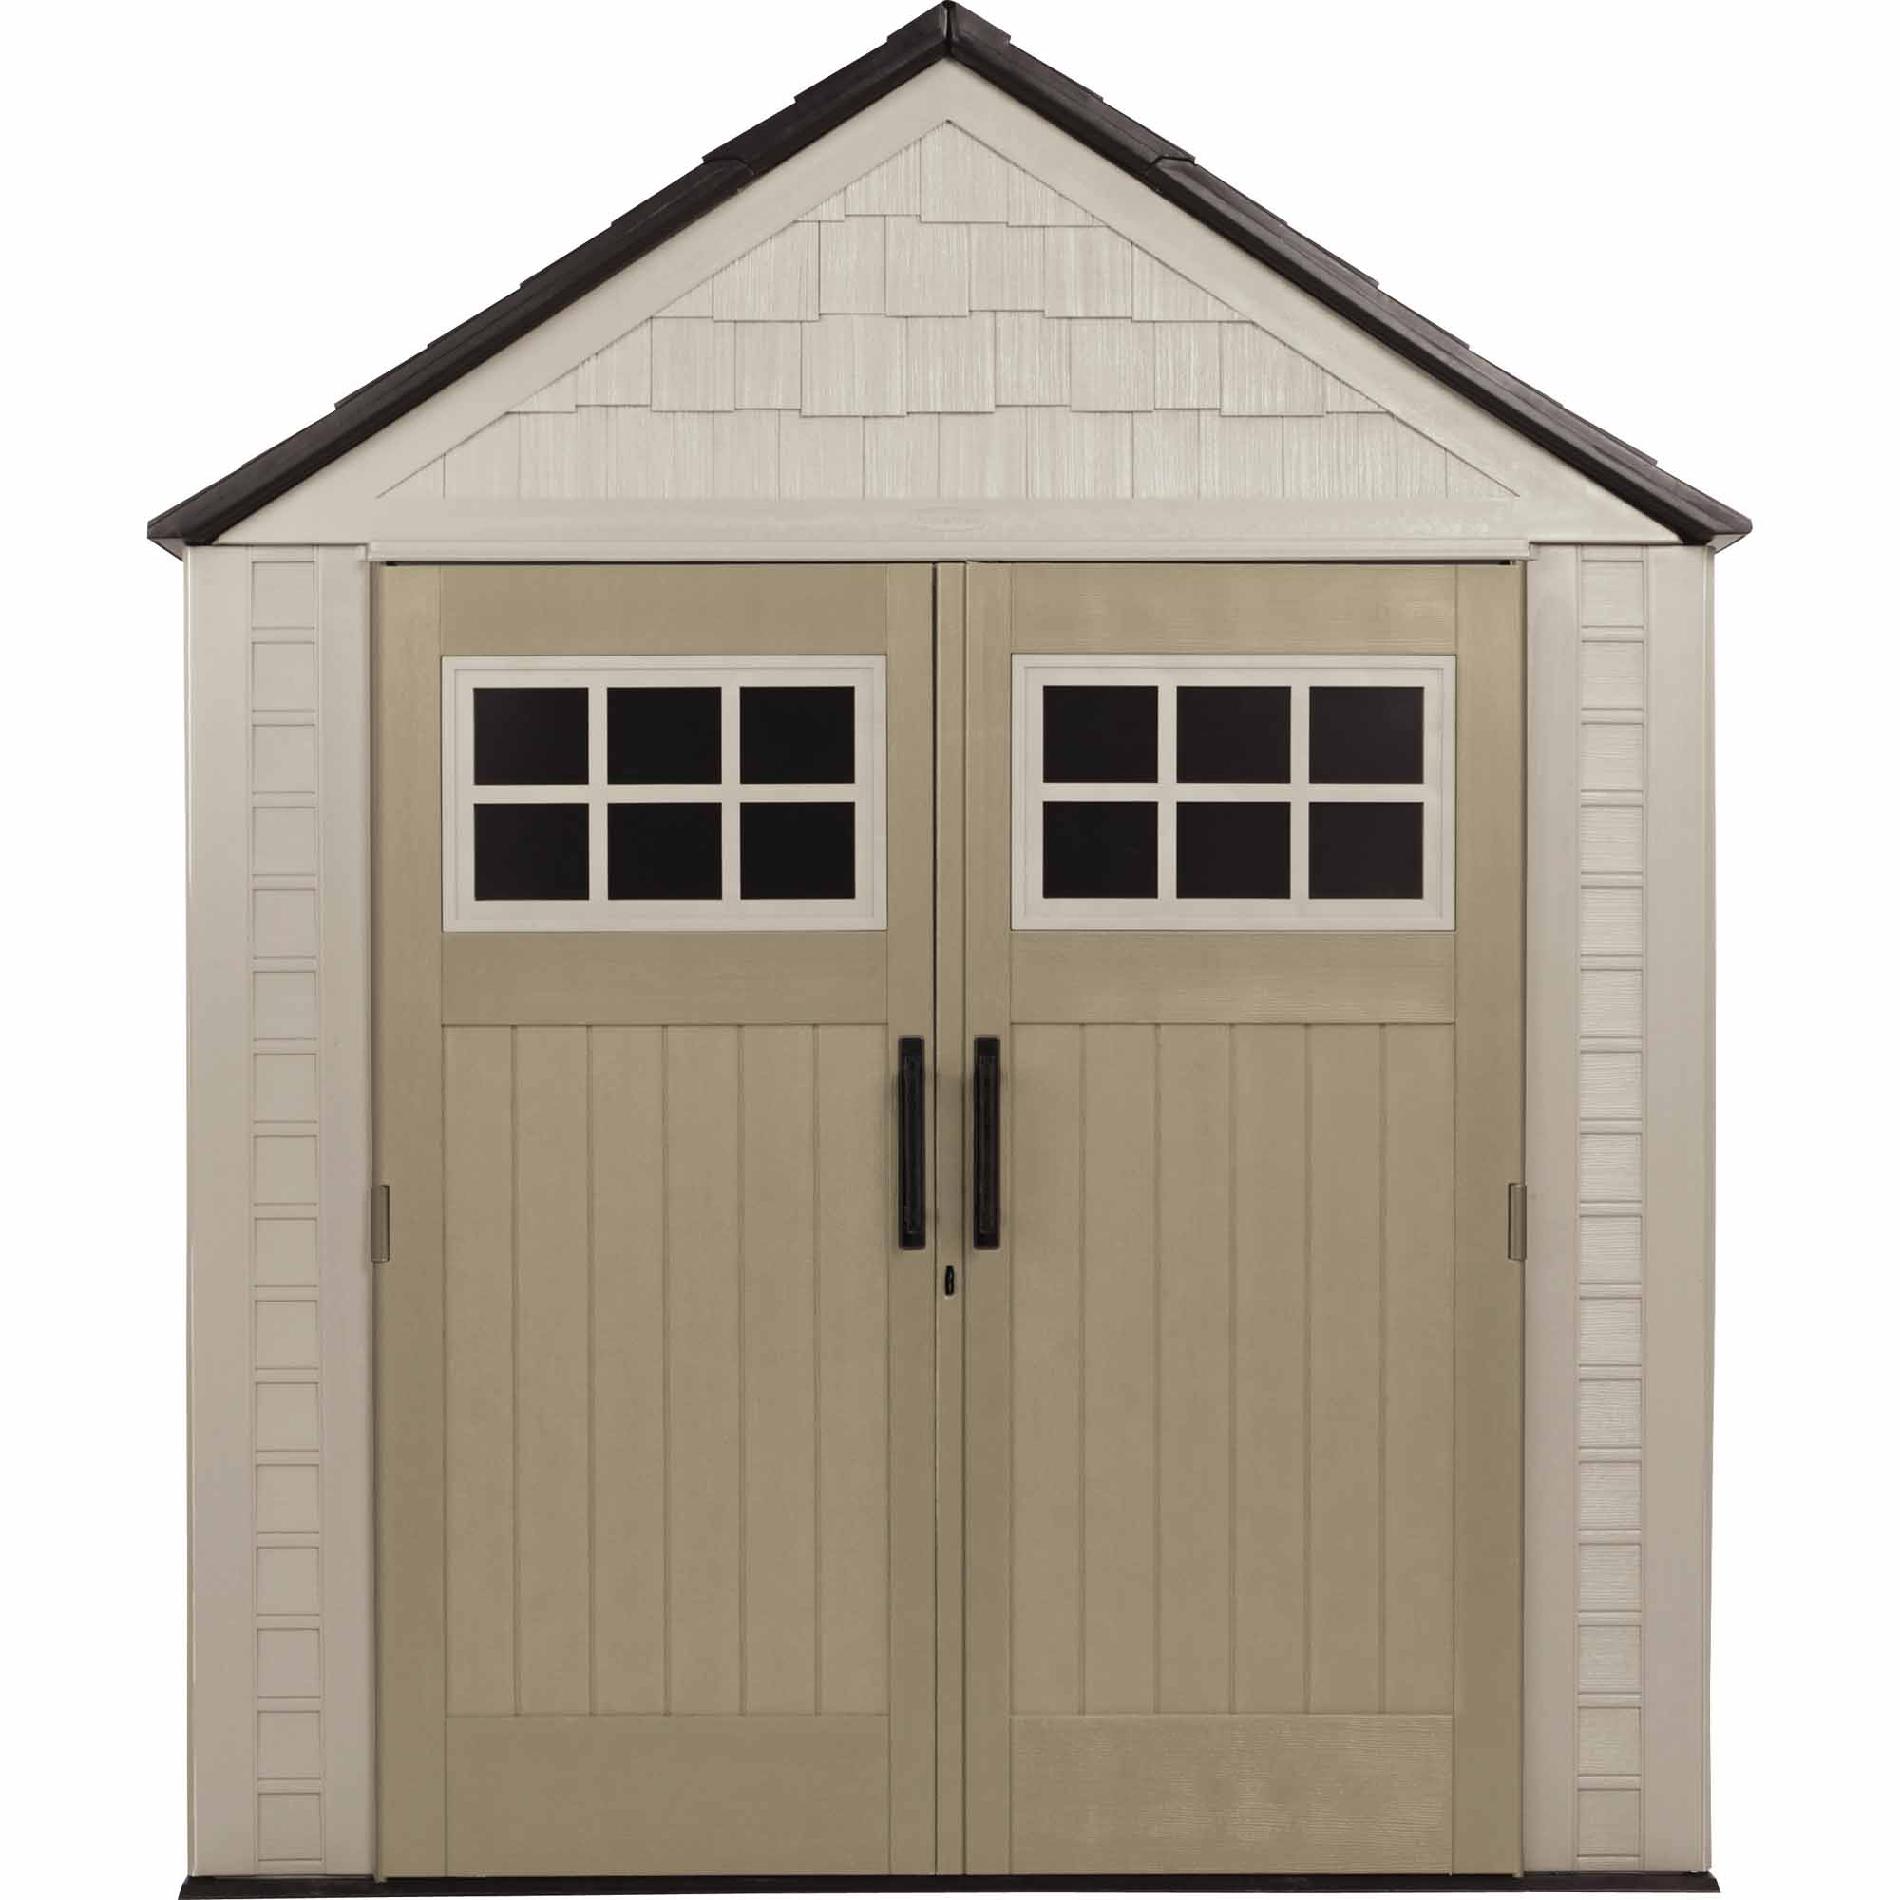 Rubbermaid Outdoor Resin Storage Shed, 7' x 7' - Lawn & Garden - Sheds